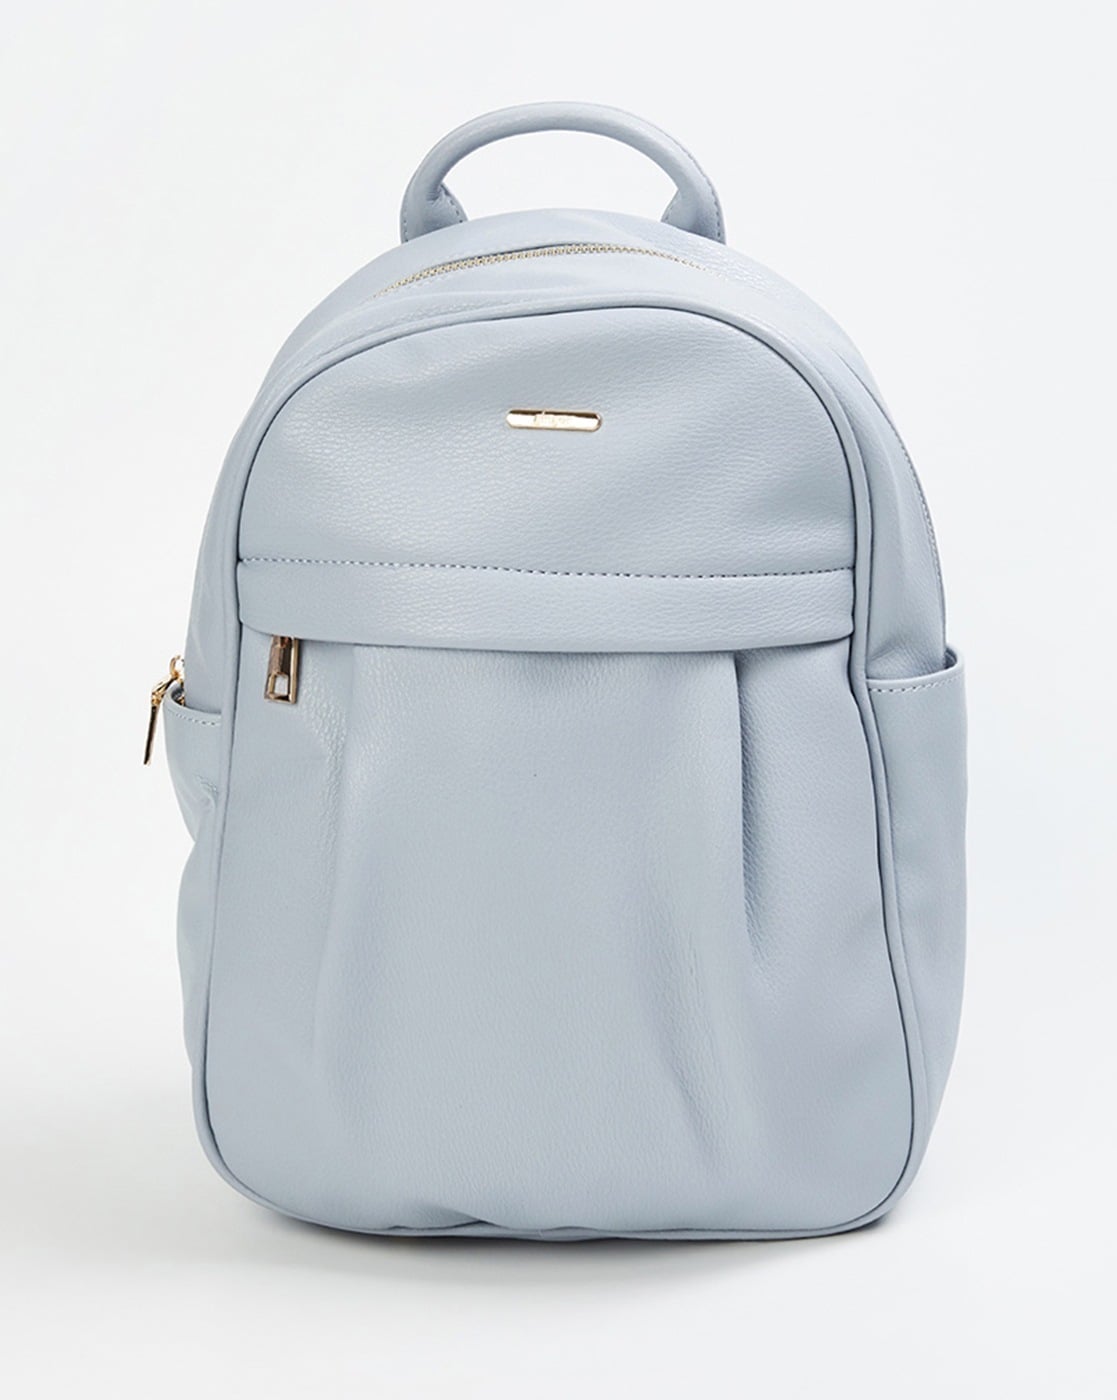 Buy Designer Leather Backpack Purse Multifunctional Ladies Backpacks Solid  Shoulder Bags for Womens (Light blue-PU) at Amazon.in